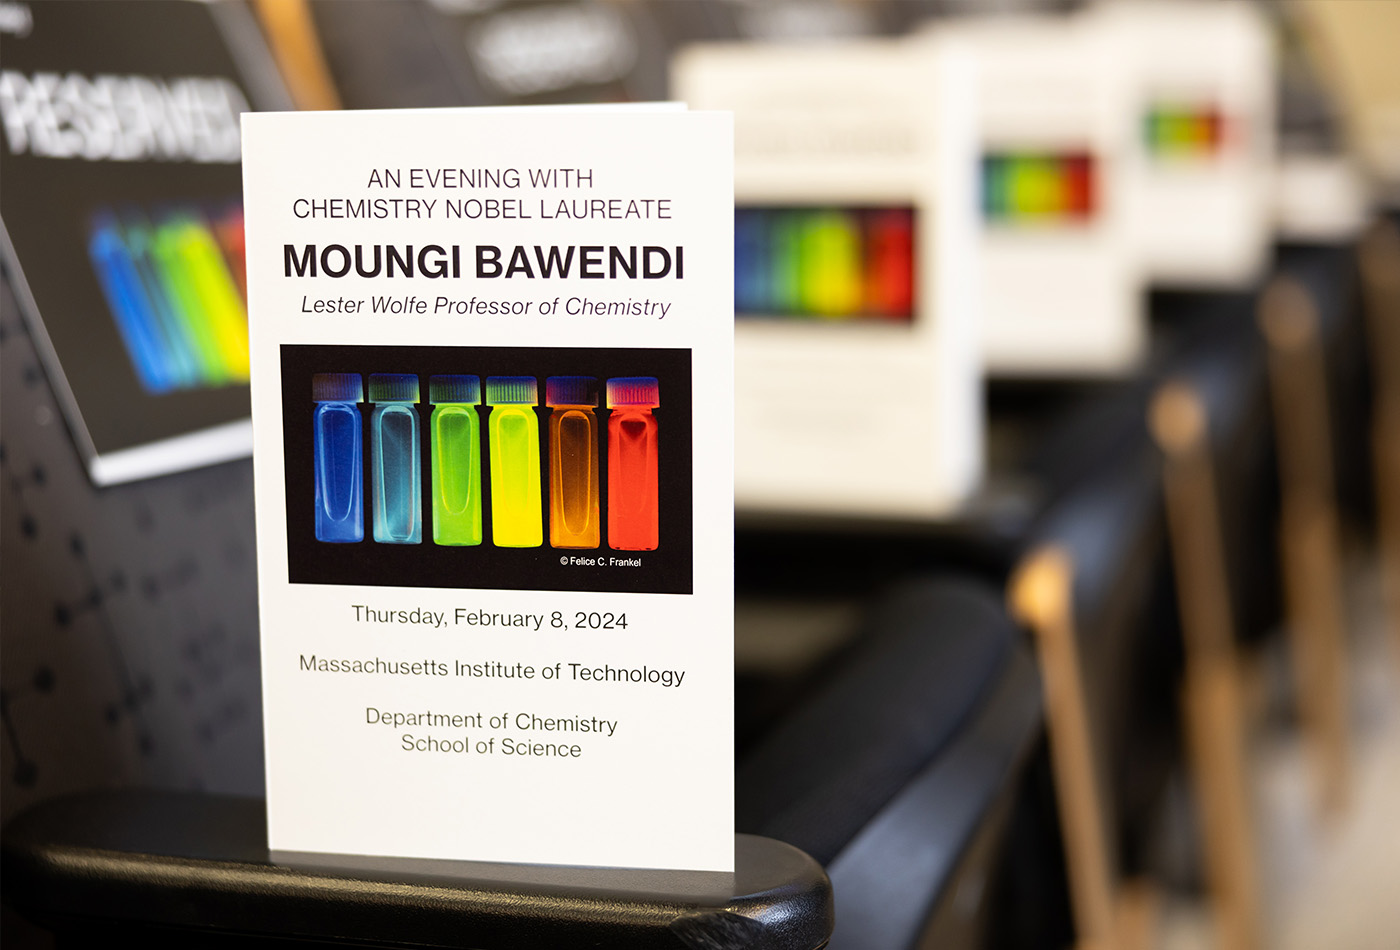 A program reads AN EVENING WITH CHEMISTRY NOBEL LAUREATE MOUNGI BAWENDI and features a colorful photo of quantum dots in six small vials.